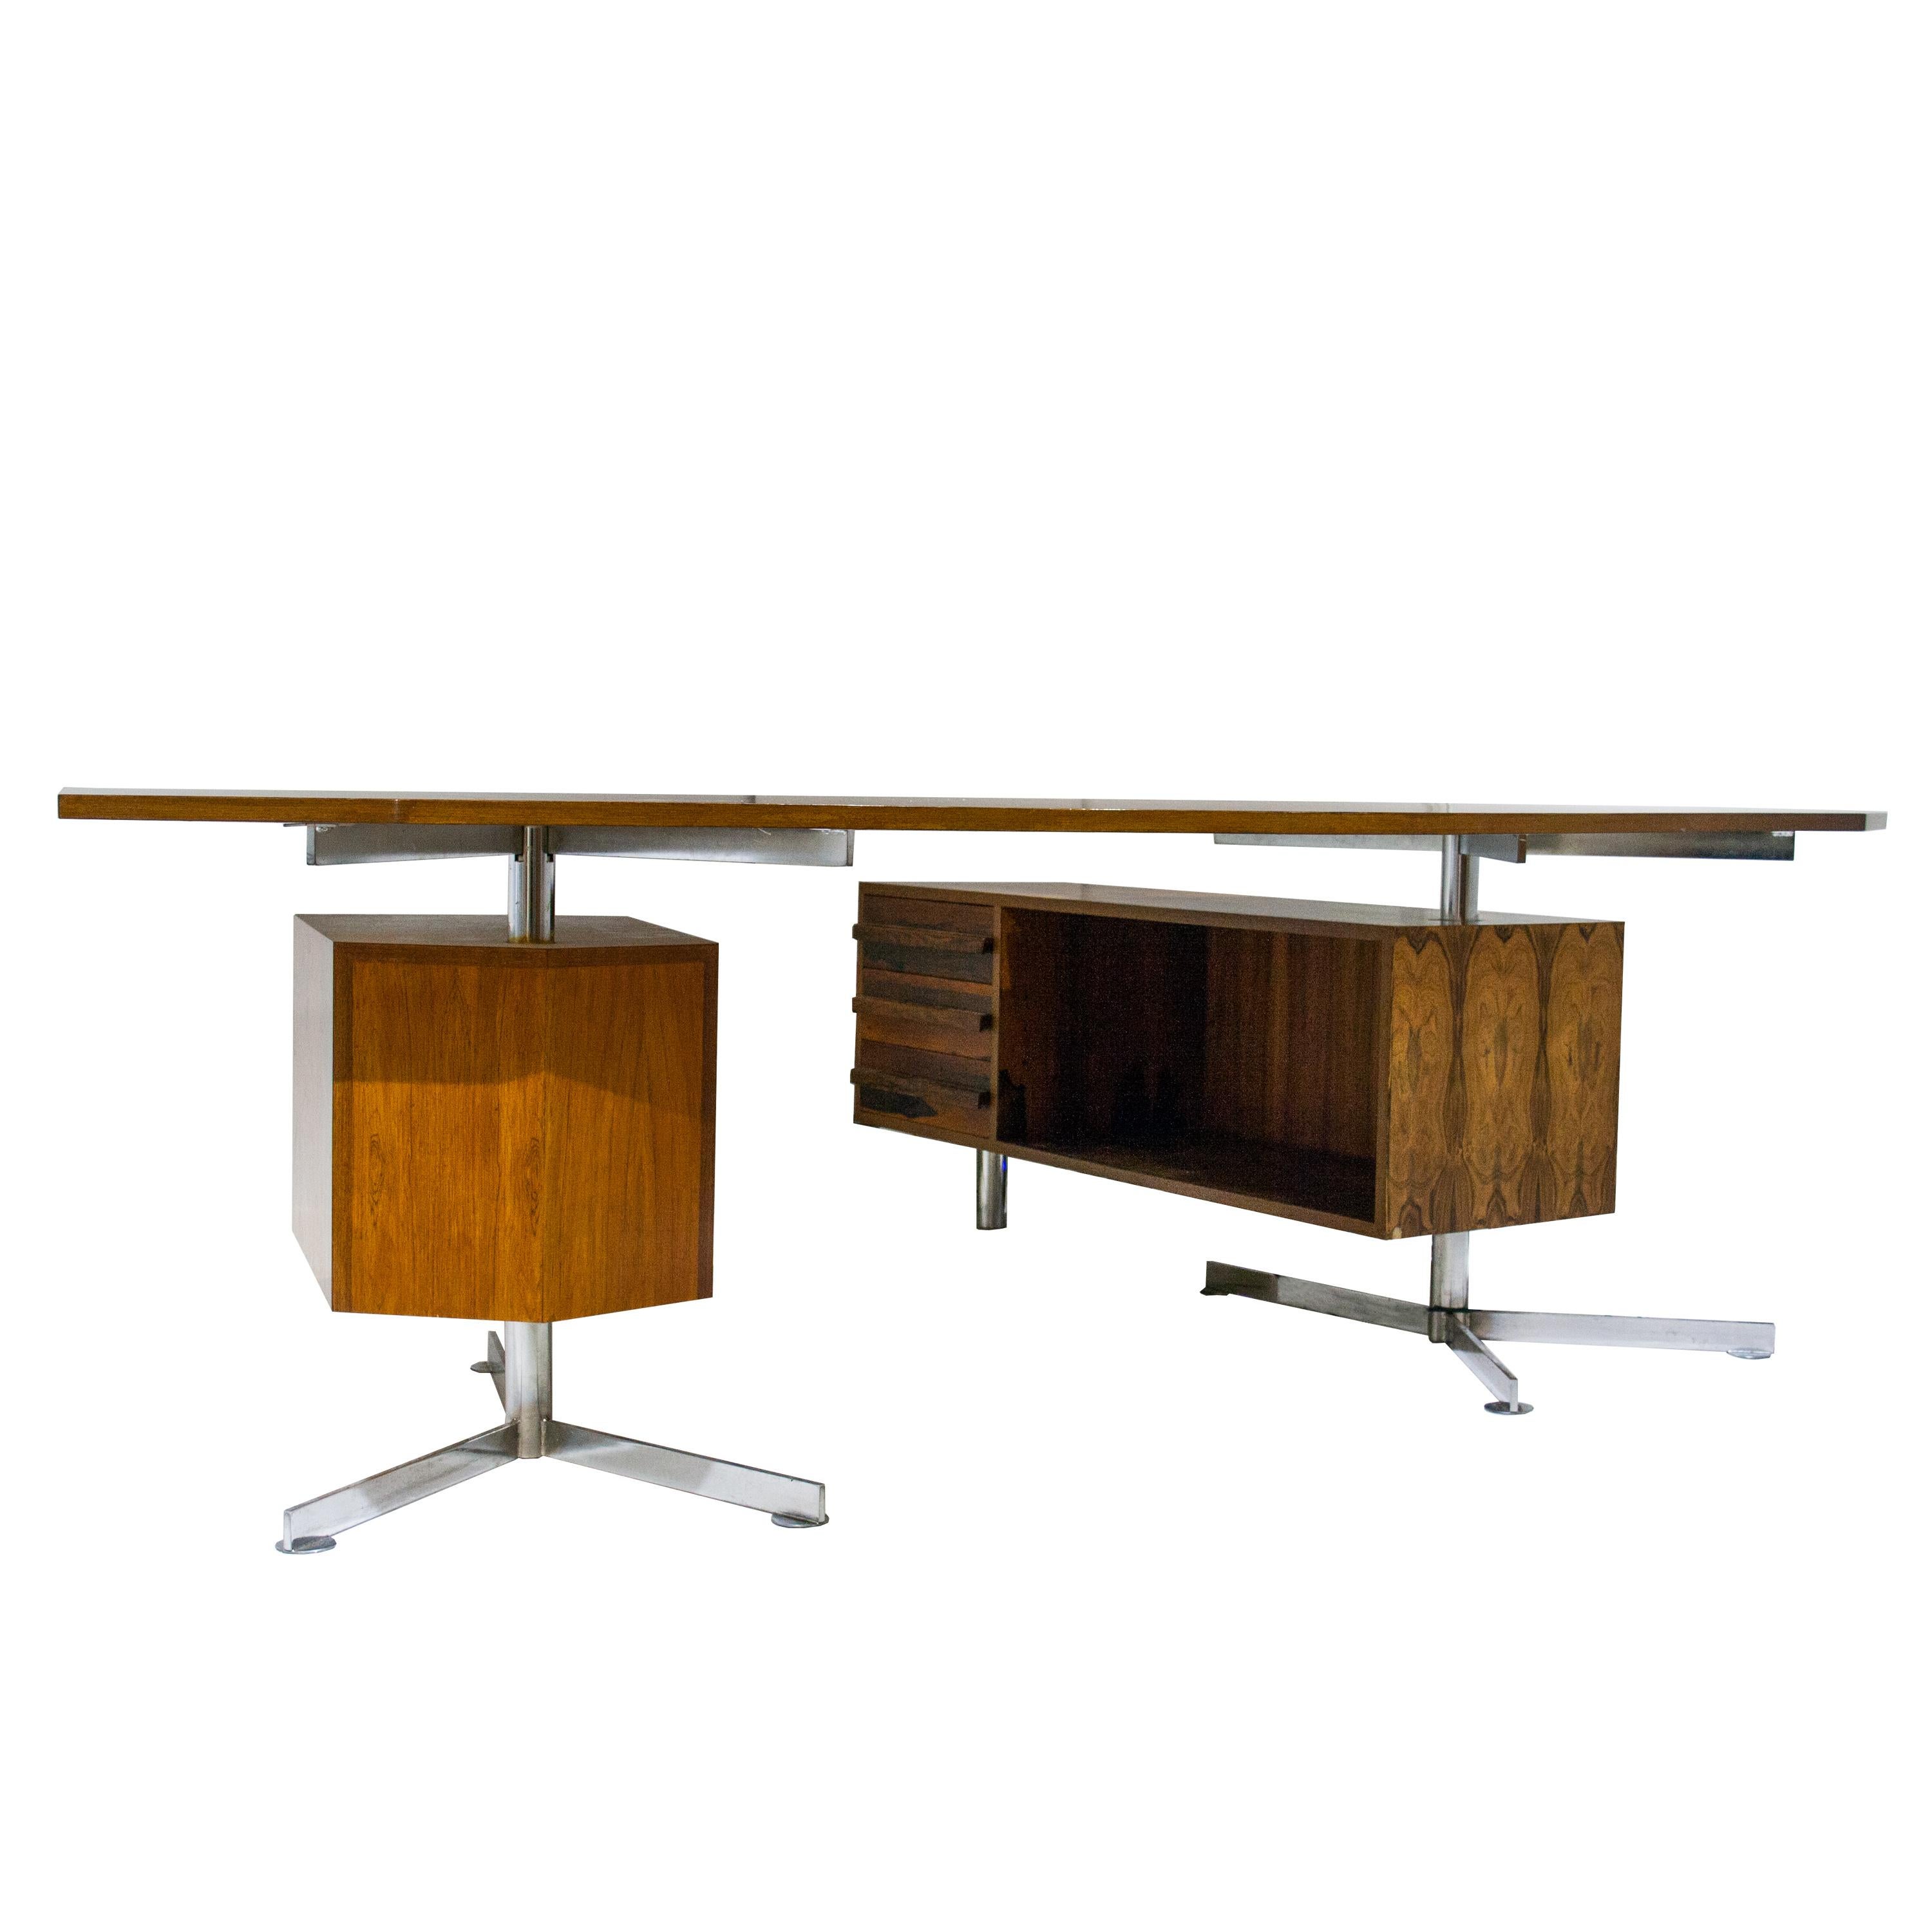 Osvaldo Borsani´s T96 two moduled desk composed by curved topped table, drawer unit and sideboard with drawers.
Made in mahogany with chromed steel joints and legs.

